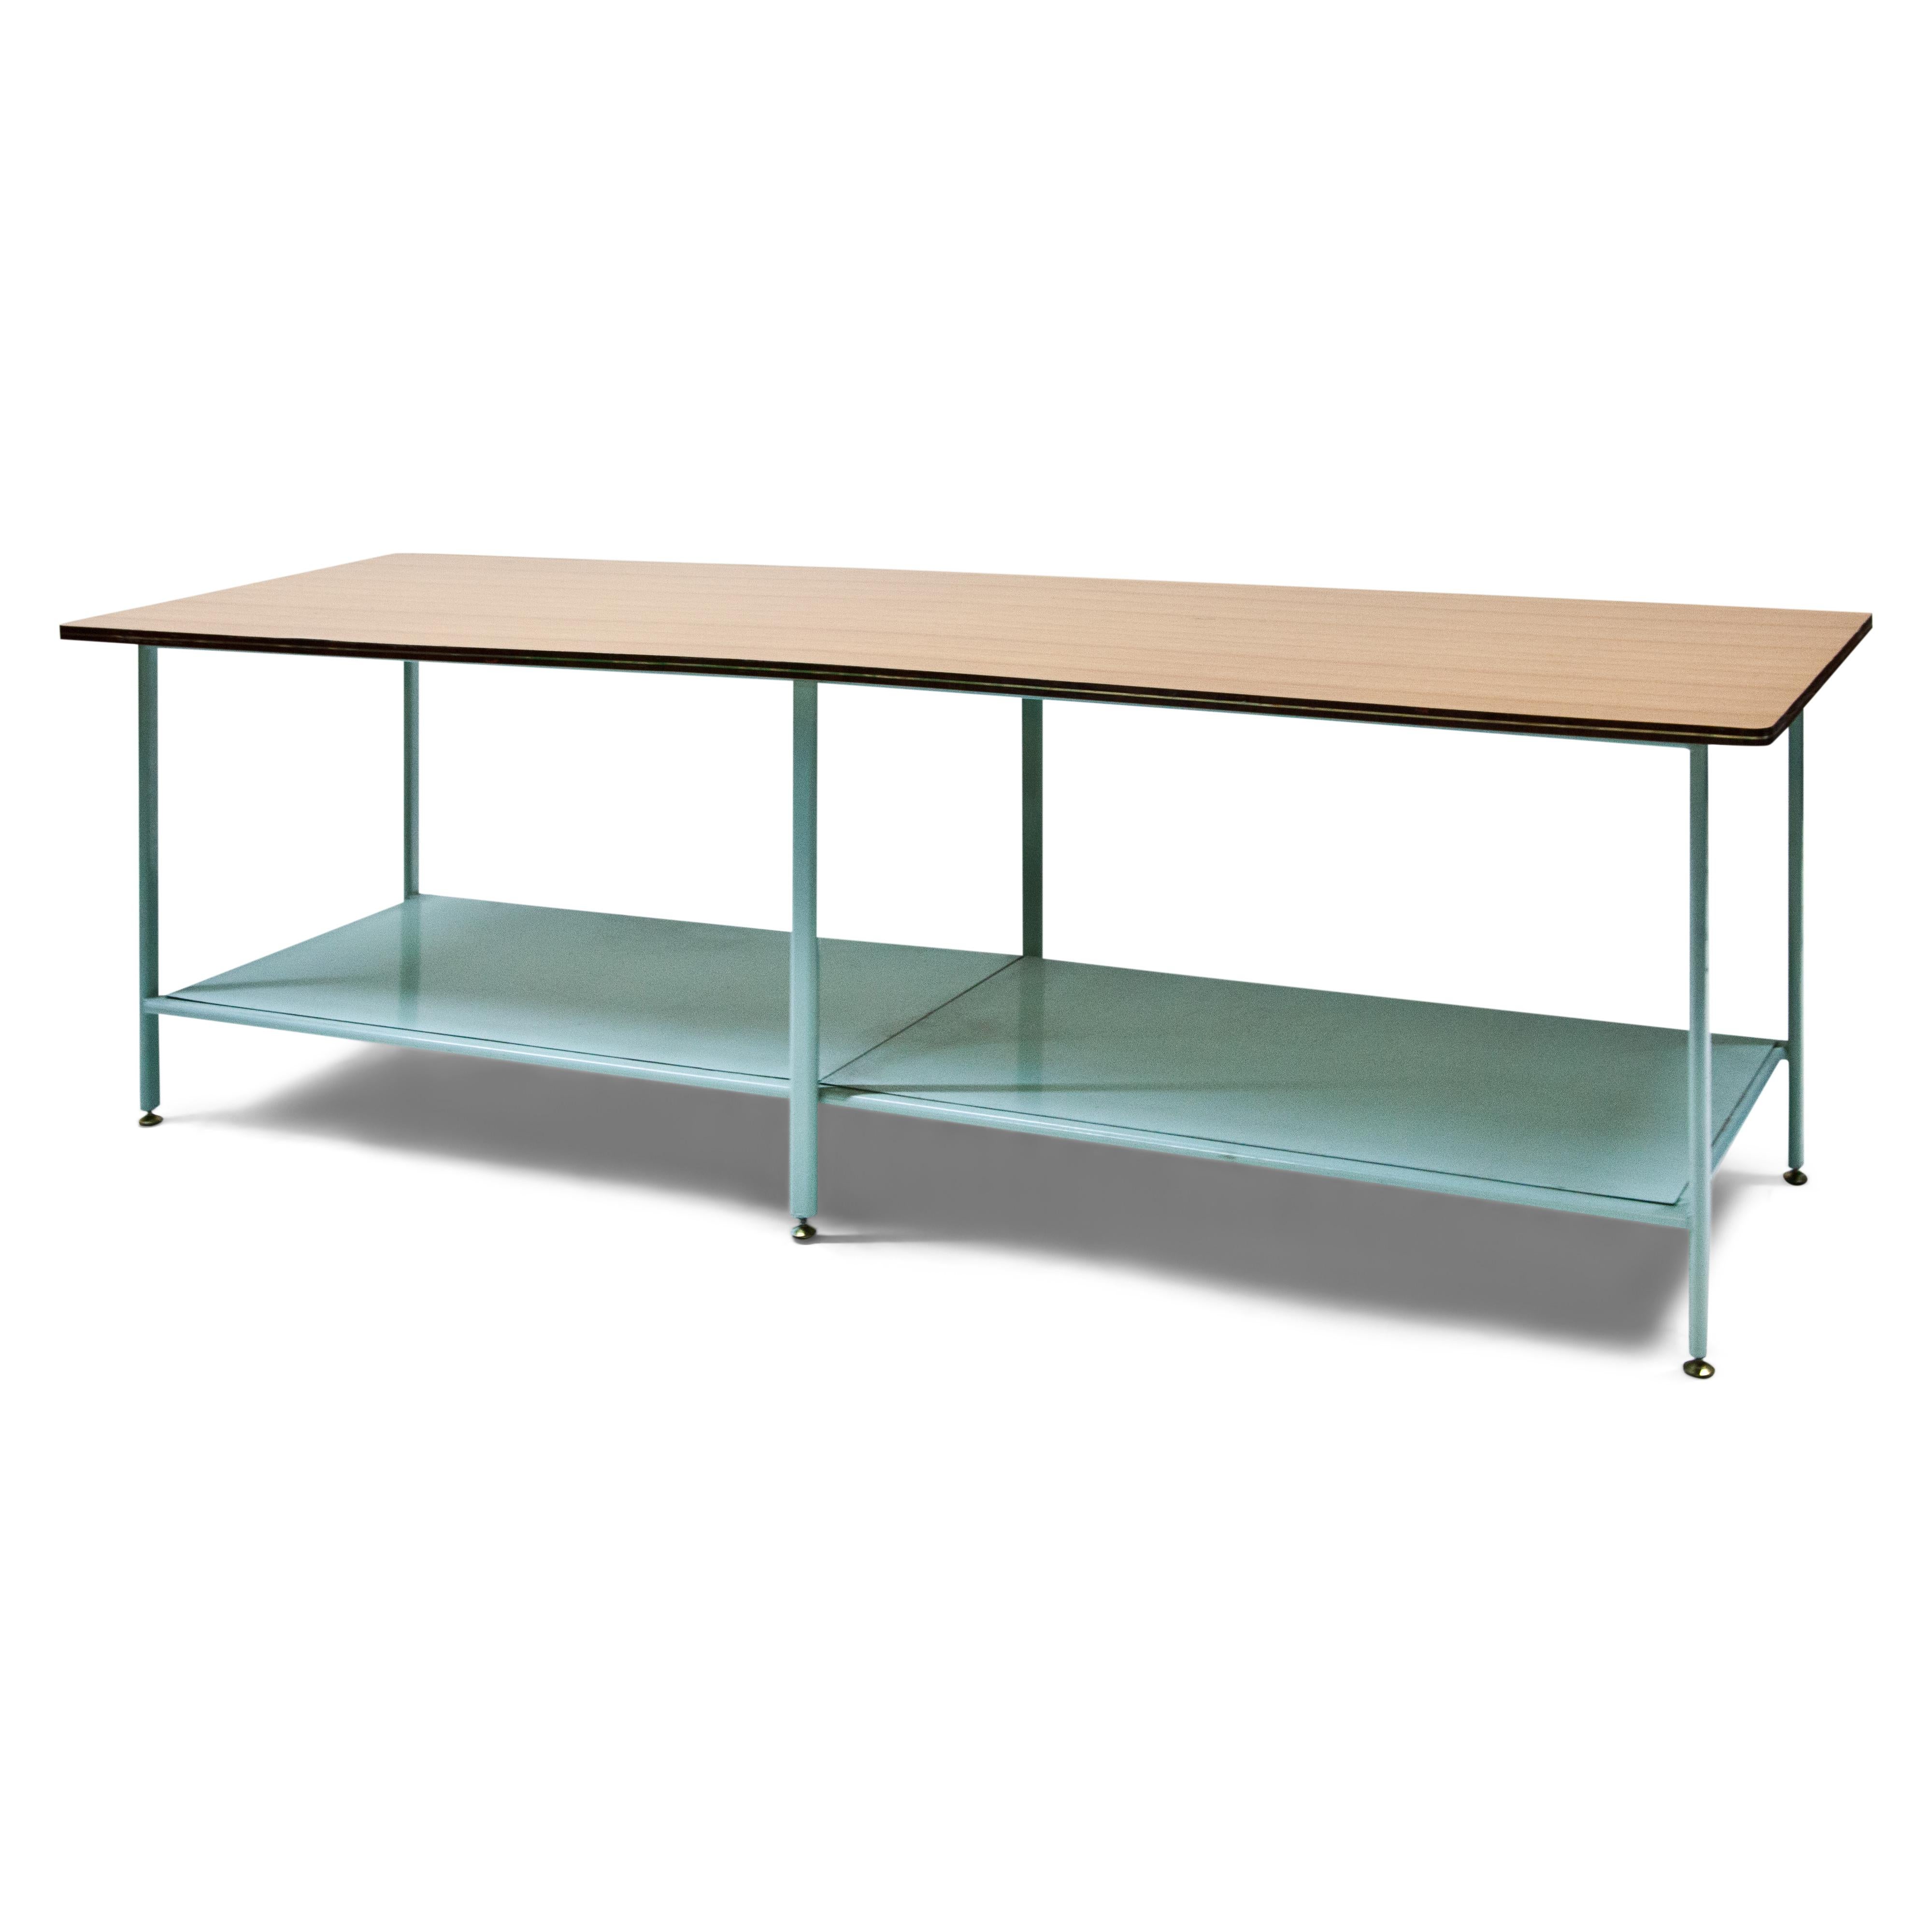 Two worktables on a light blue metal frame with shelf and veneered tabletop with brass thread inserted on the edge, in the style of the Riva boats. These tables came from the same workshop.